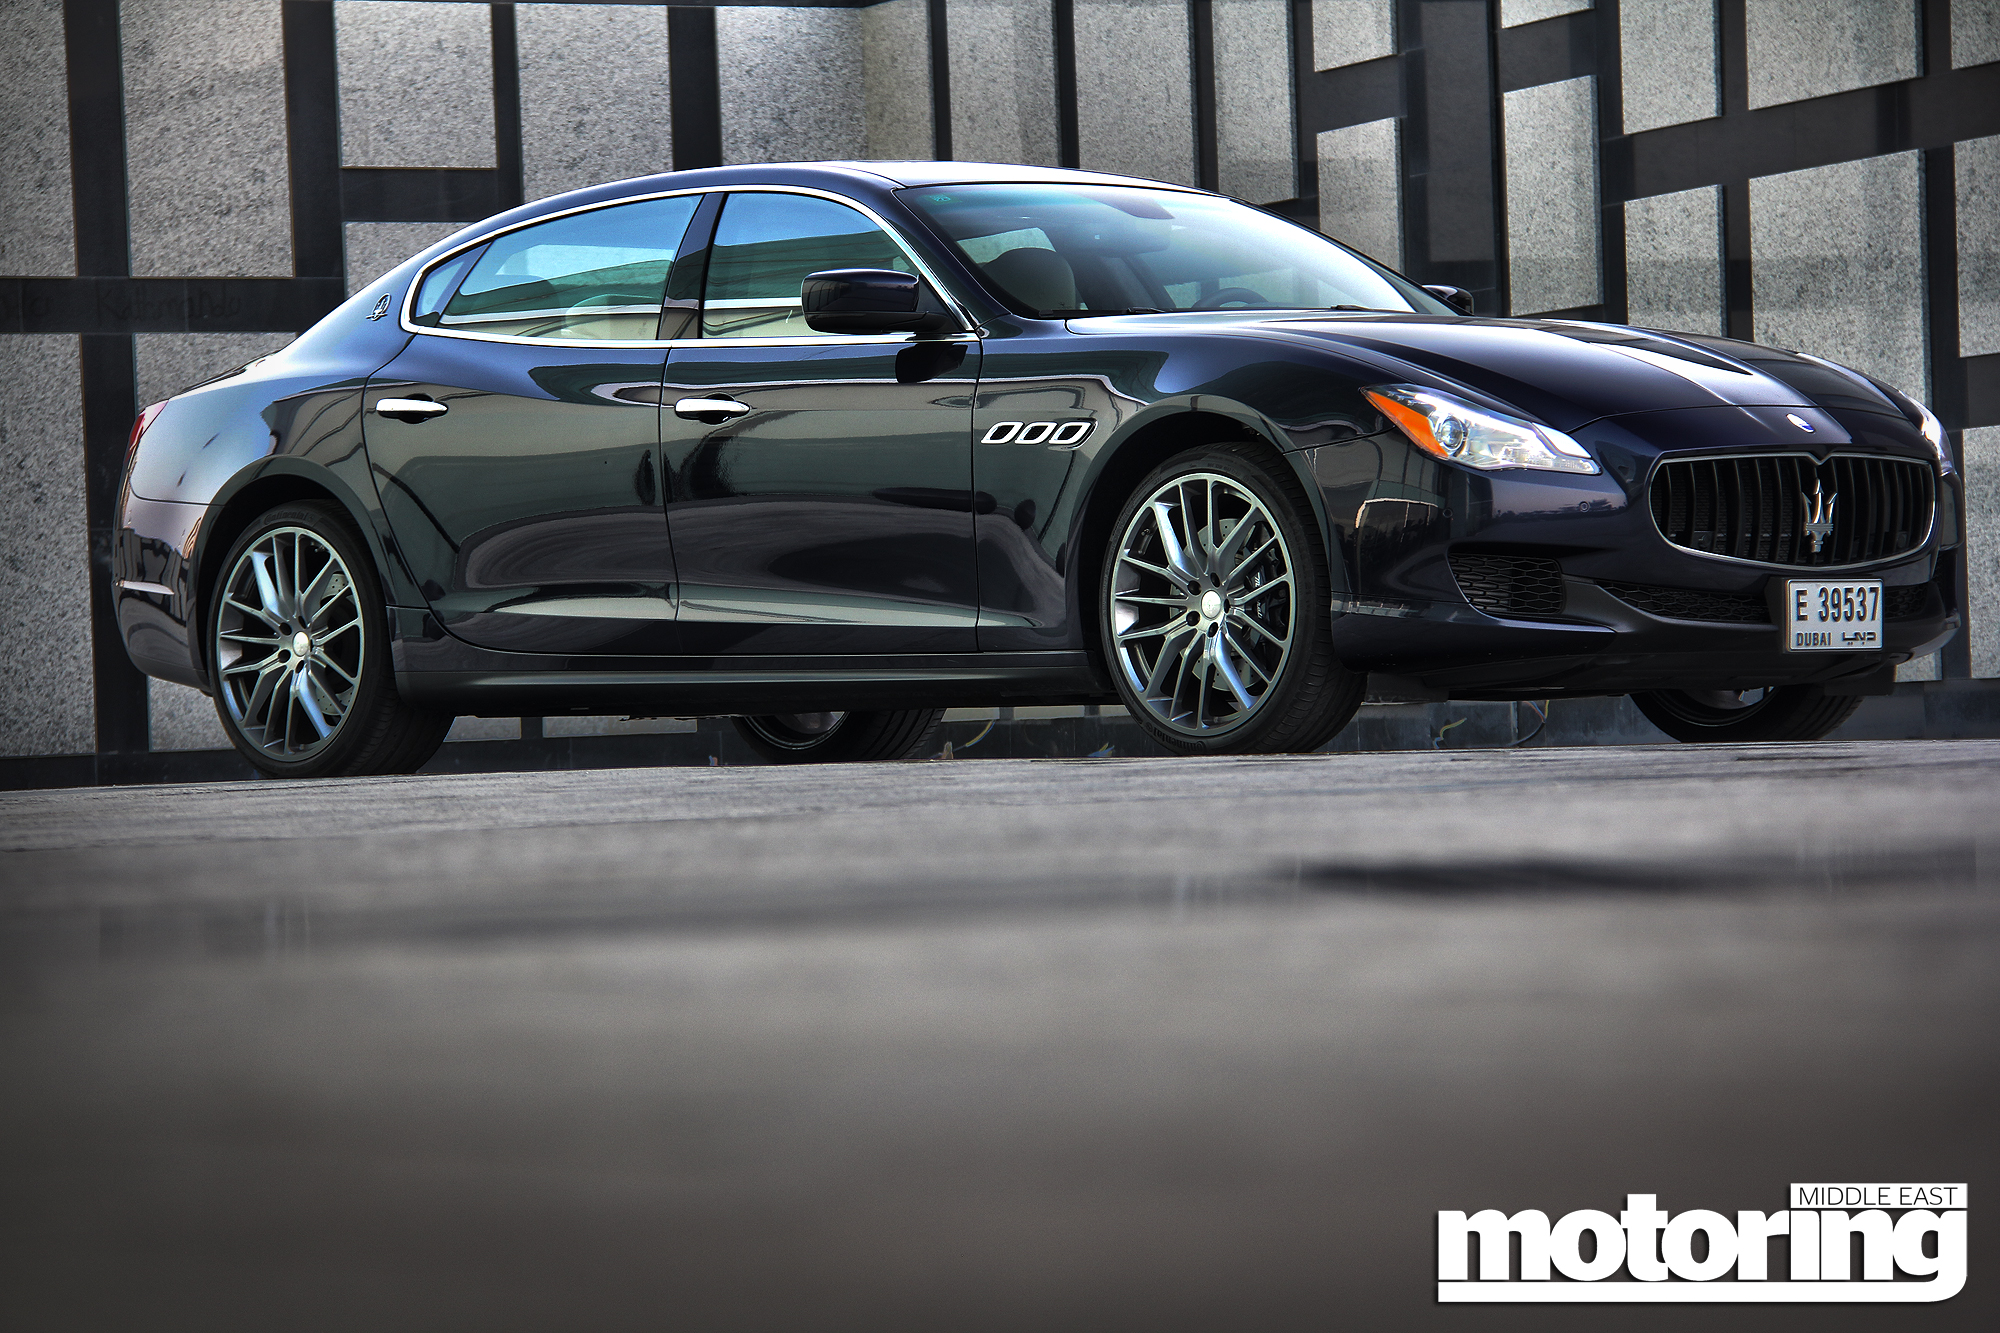 Maserati Quattroporte GTS 2013 – Review - Motoring Middle East: Car news,  Reviews and Buying guidesMotoring Middle East: Car news, Reviews and Buying  guides